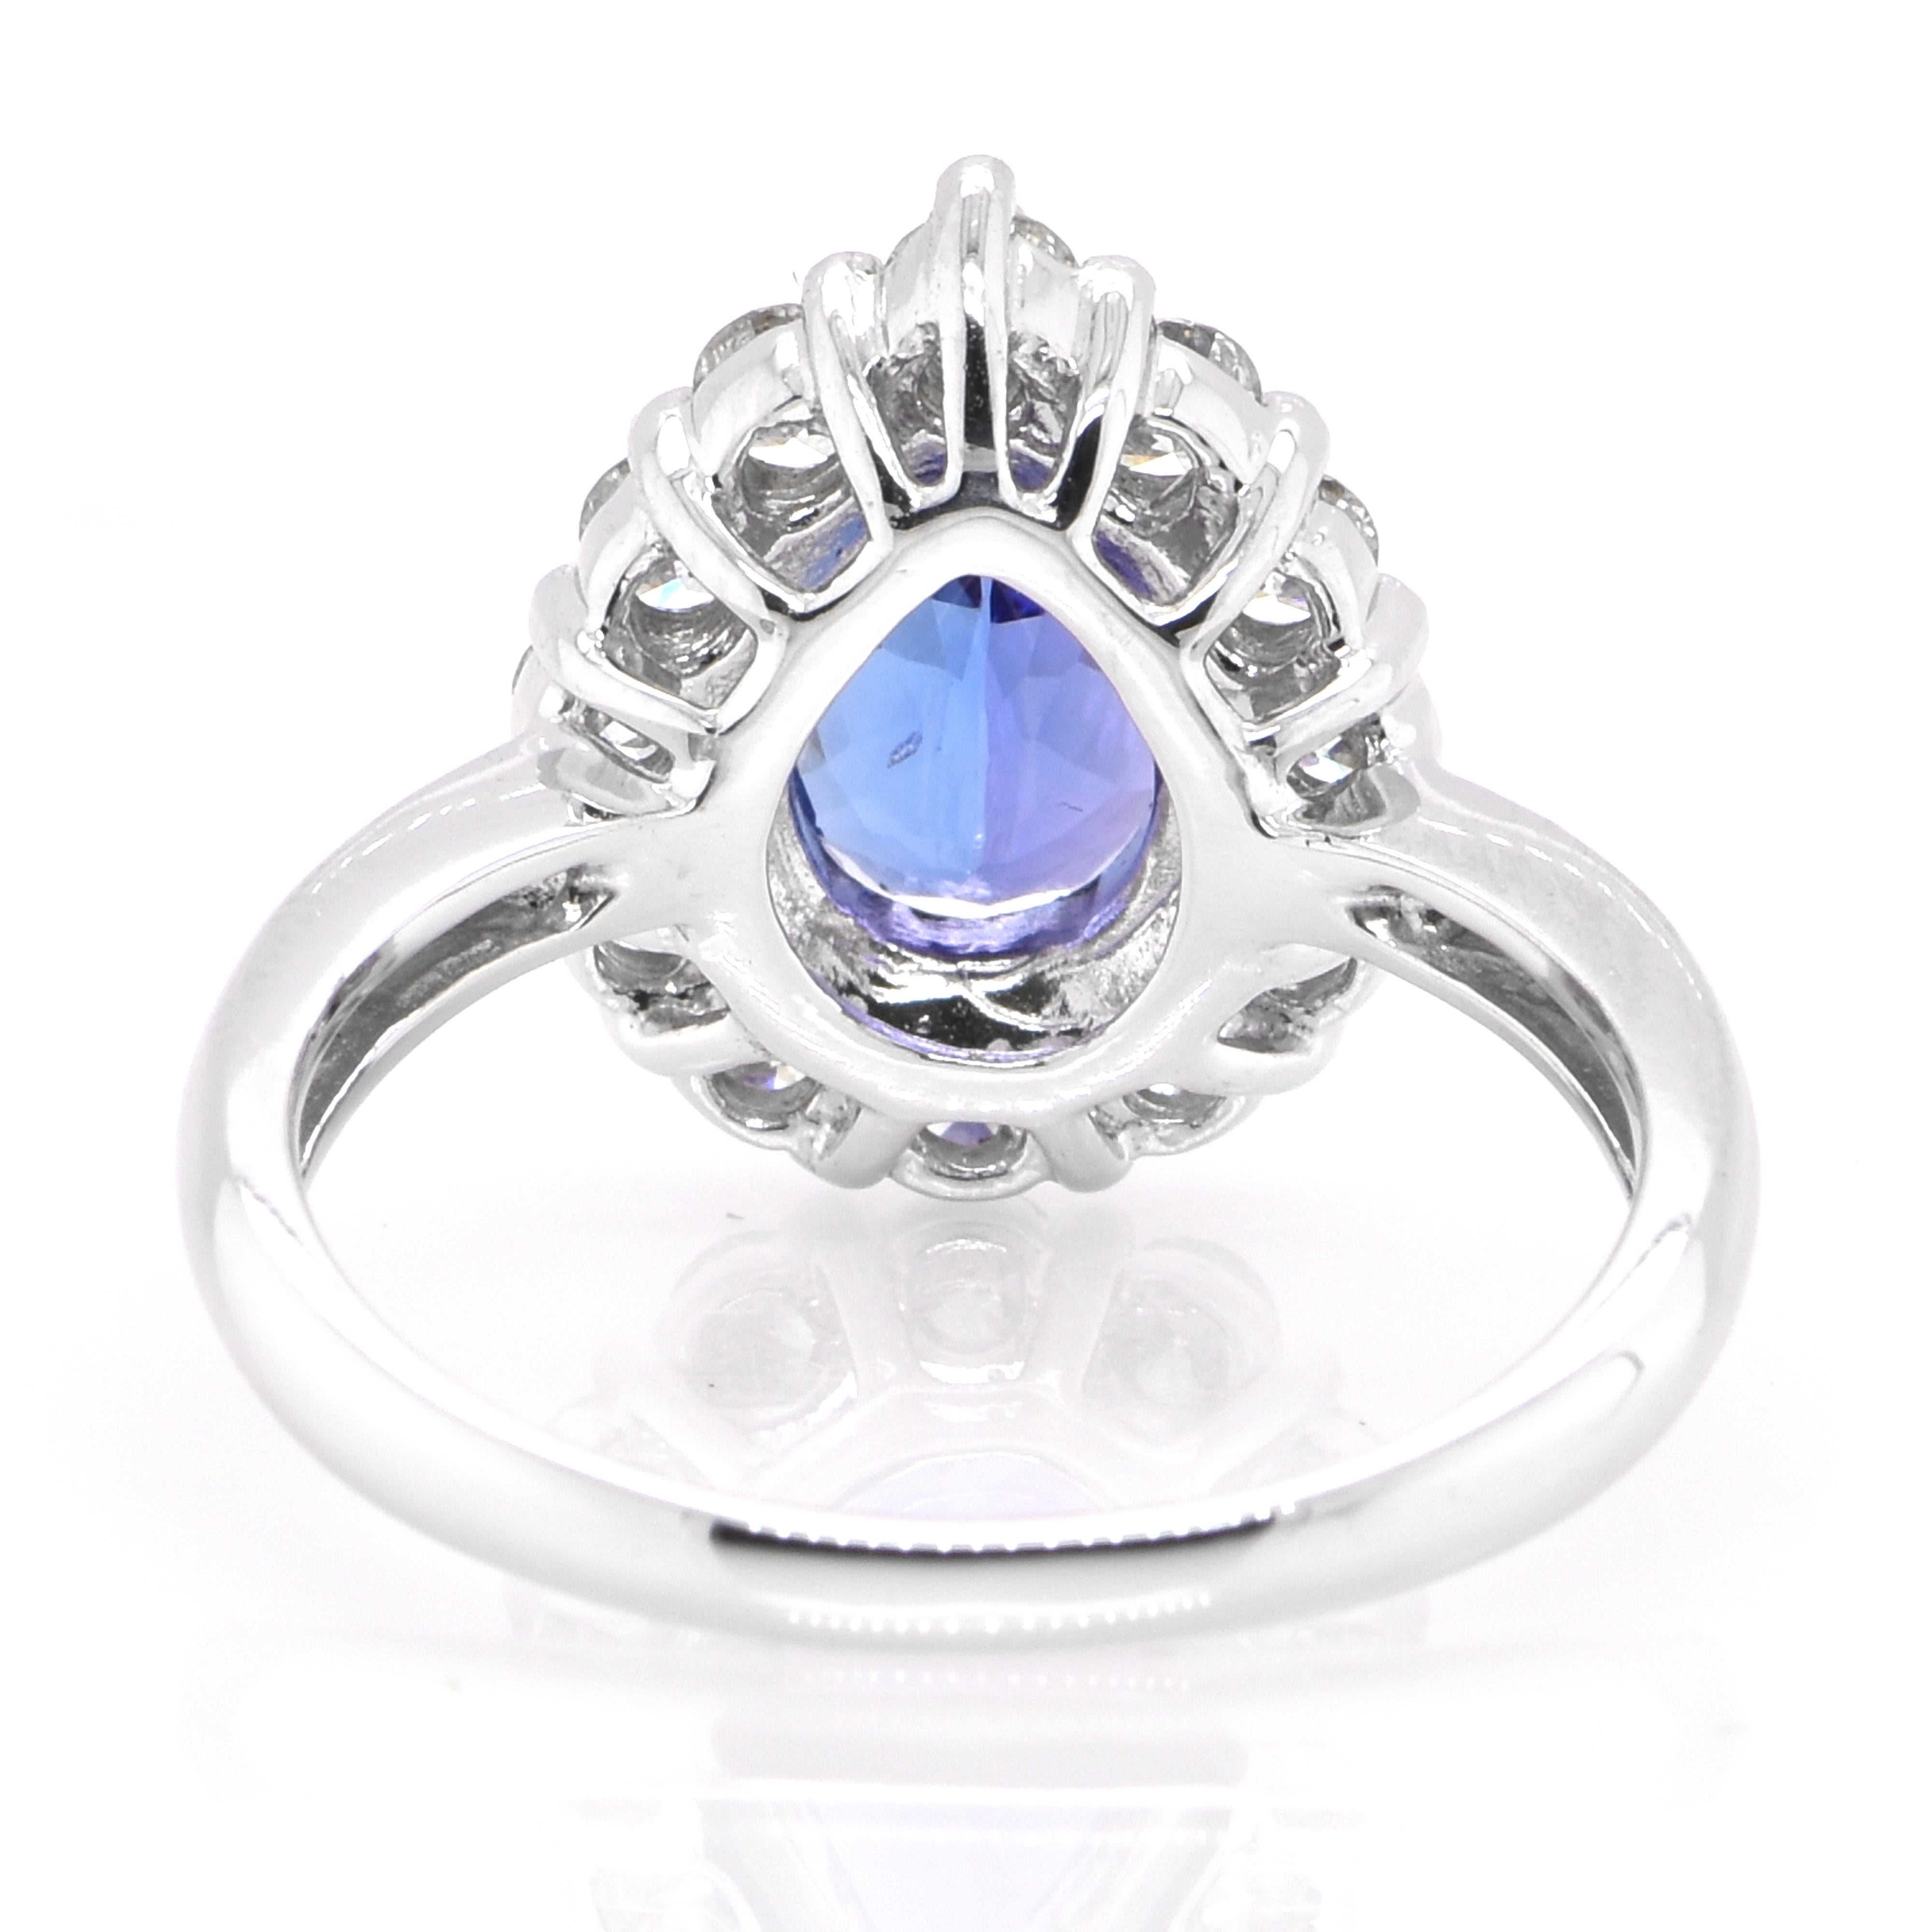 1.69 Carat Natural Pear Cut AAA+ Tanzanite and Diamond Ring Set in Platinum For Sale 1